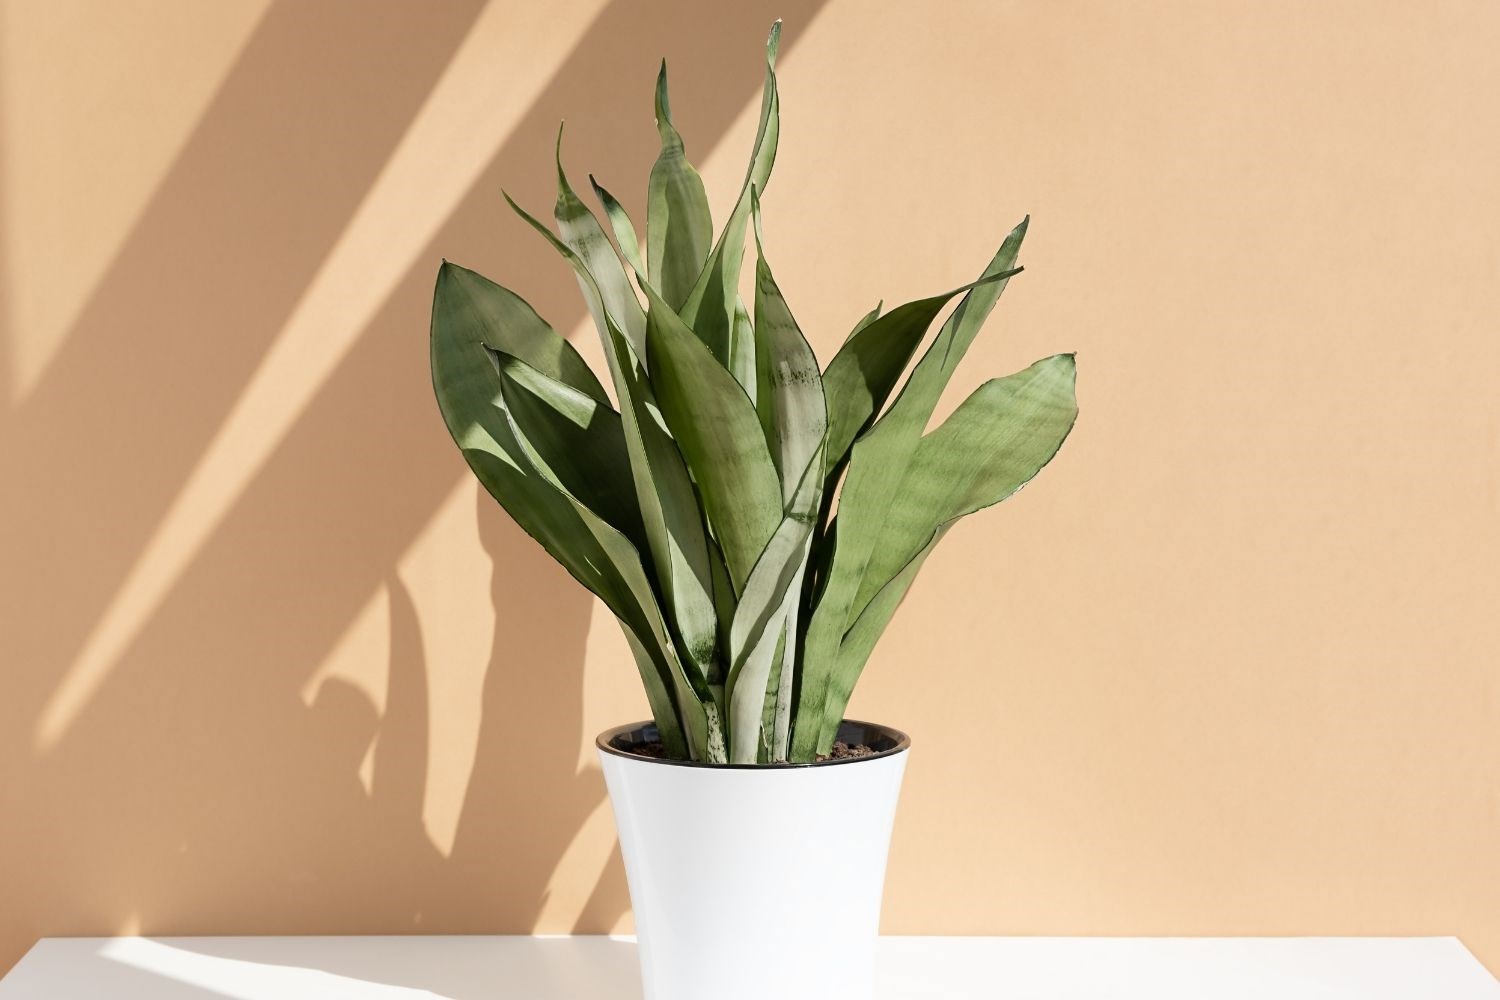 10 of the best low light indoor plants and how to grow them | Better ...